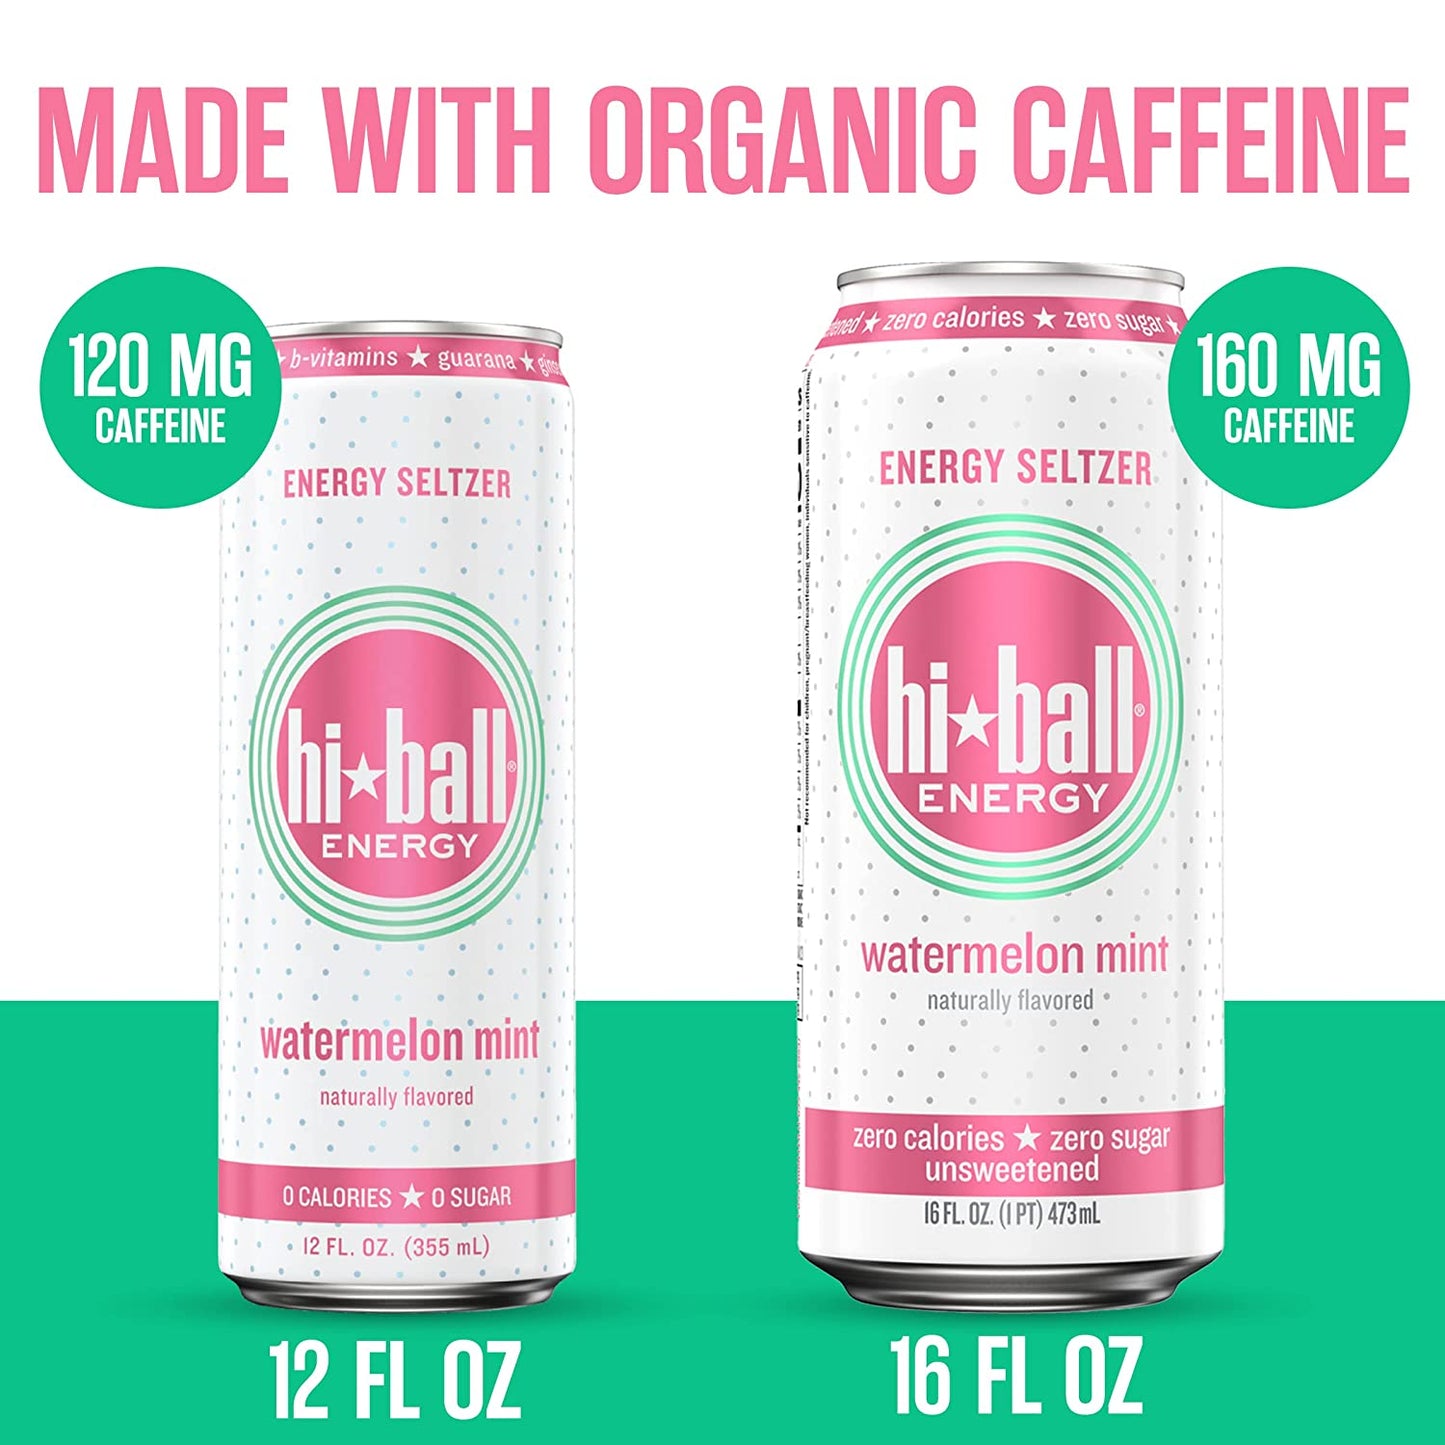 Hiball Energy Seltzer Water, Caffeinated Sparkling Water Made with Vitamin B12 and Vitamin B6, Sugar Free (8 pack of 16 Fl Oz), Watermelon